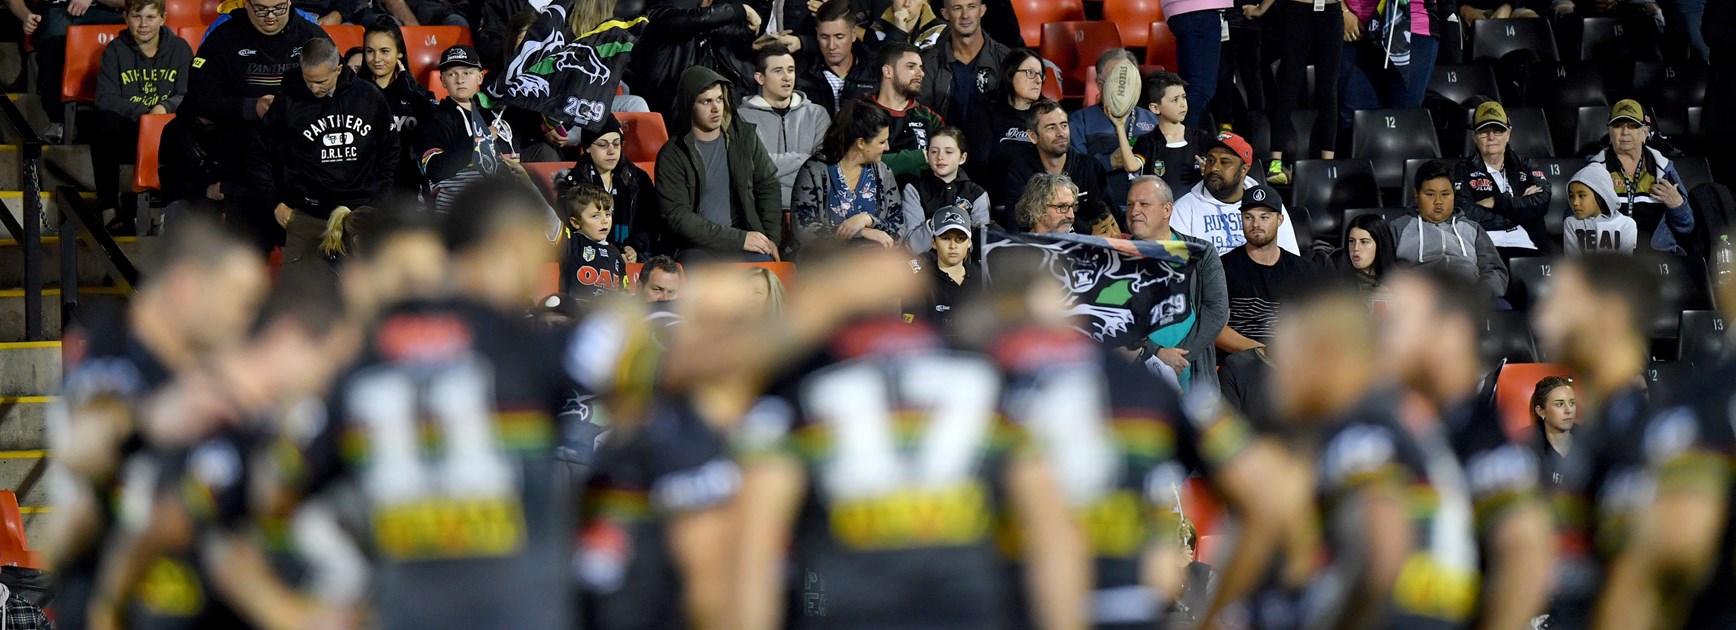 NRL issues stringent player guidelines to help prevent spread of coronavirus